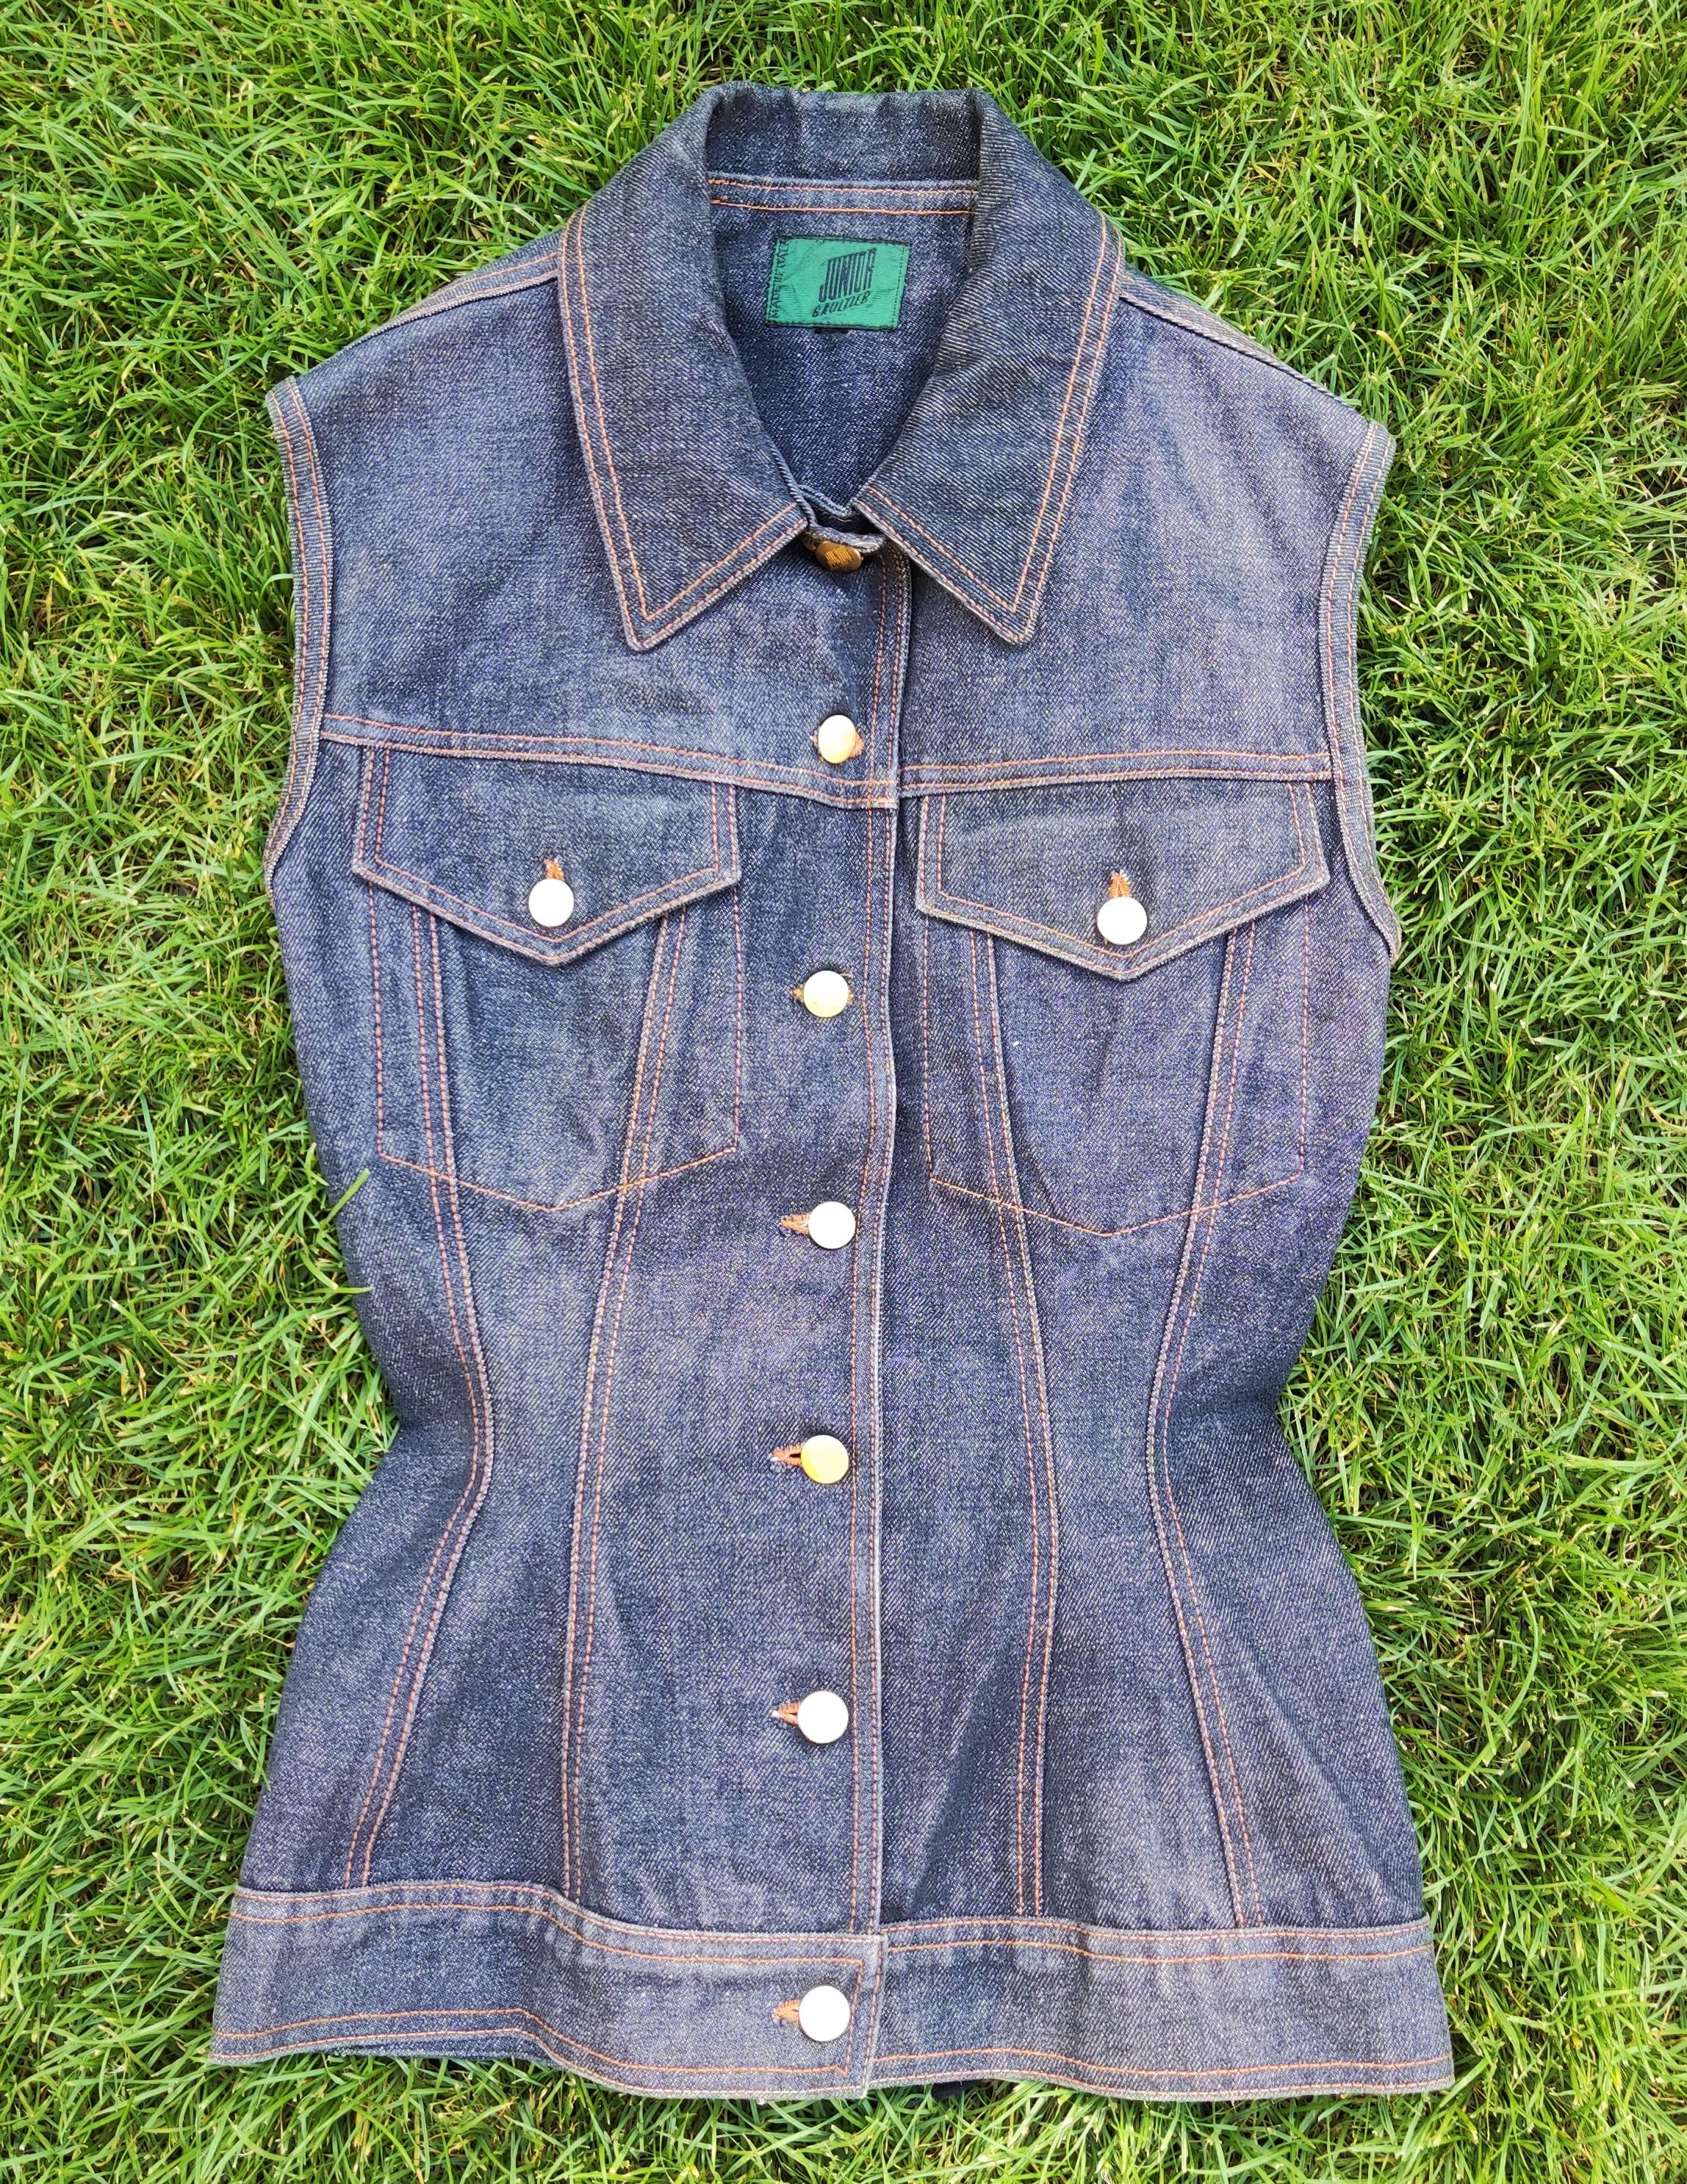 Jean Paul Gaultier Jumior Jeans Lace Up Coset Denim Optical Illusion  Vest Top

This iconic vintage Junior Gaultier corset top from the early 1990. Buttoned down the front with gold JUNIOR Gaultier buttons. 2x14-hole lacing at the back with original